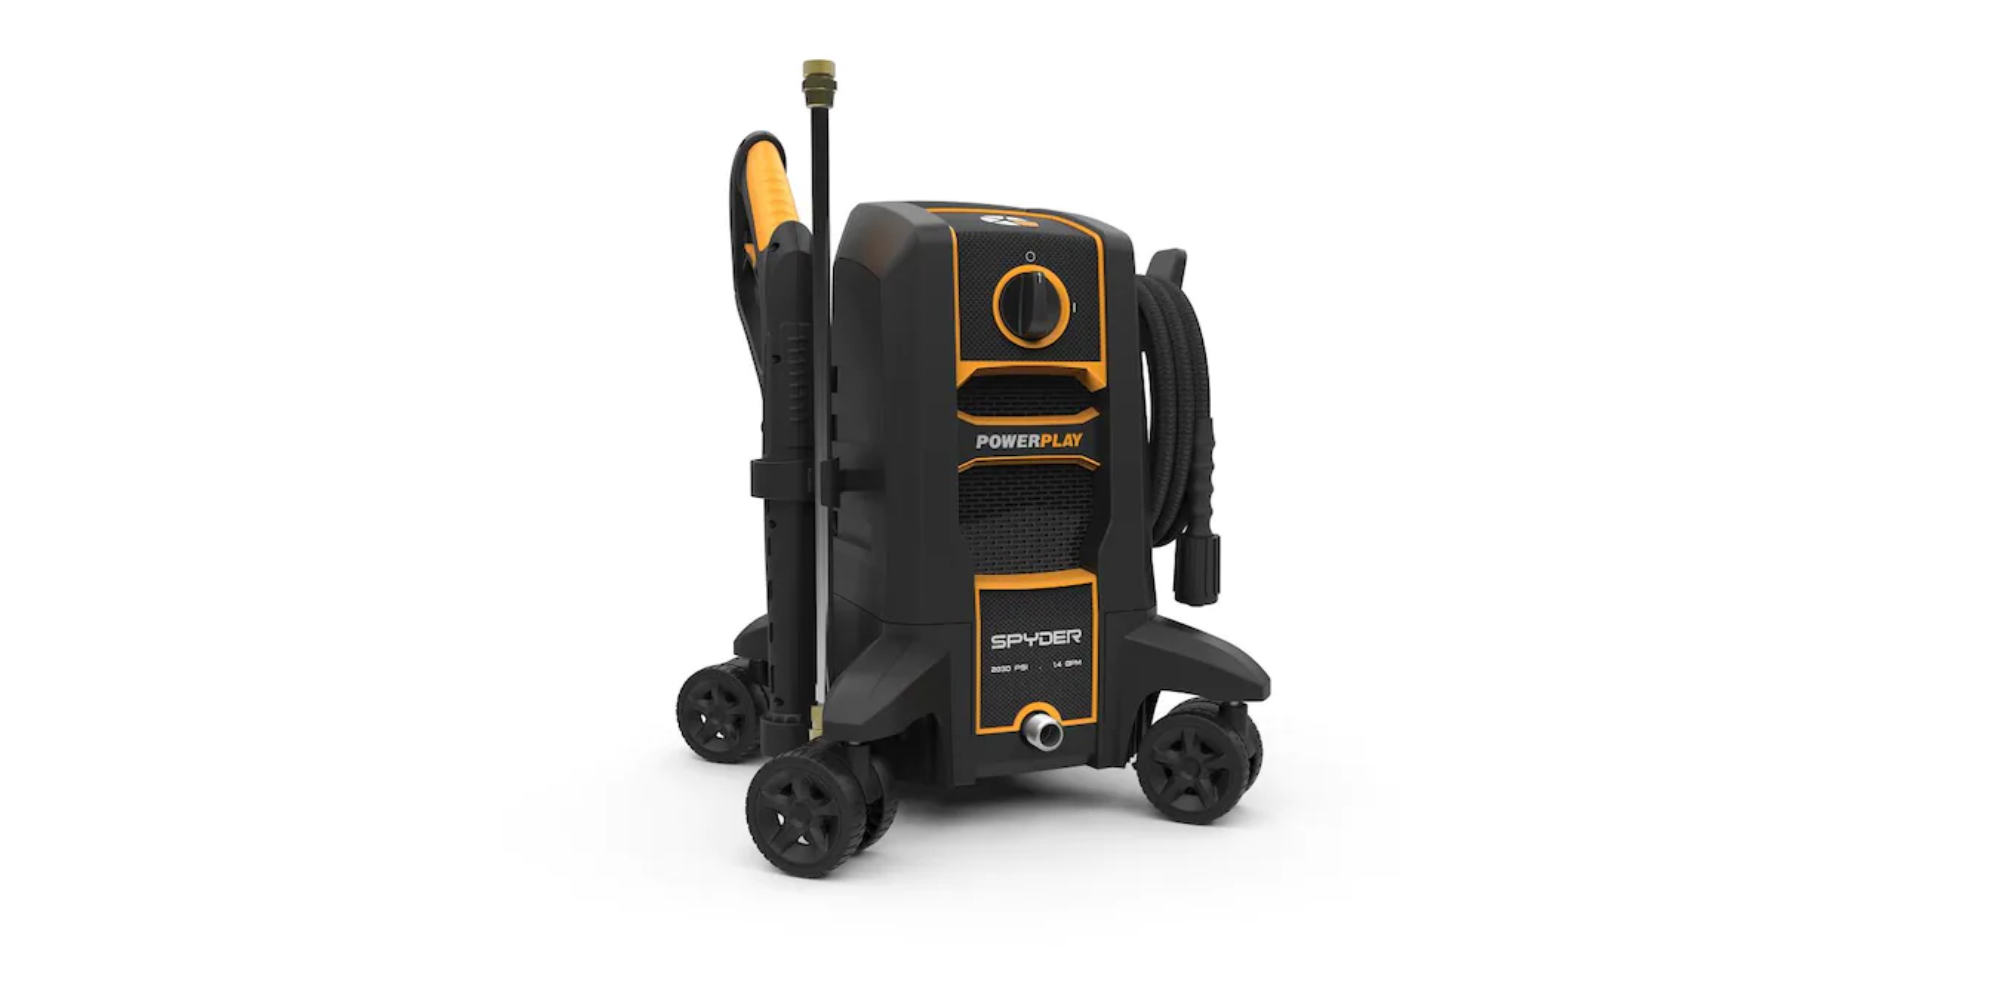 Clean up your home before fall with this $139 electric pressure washer, more in New Green Deals